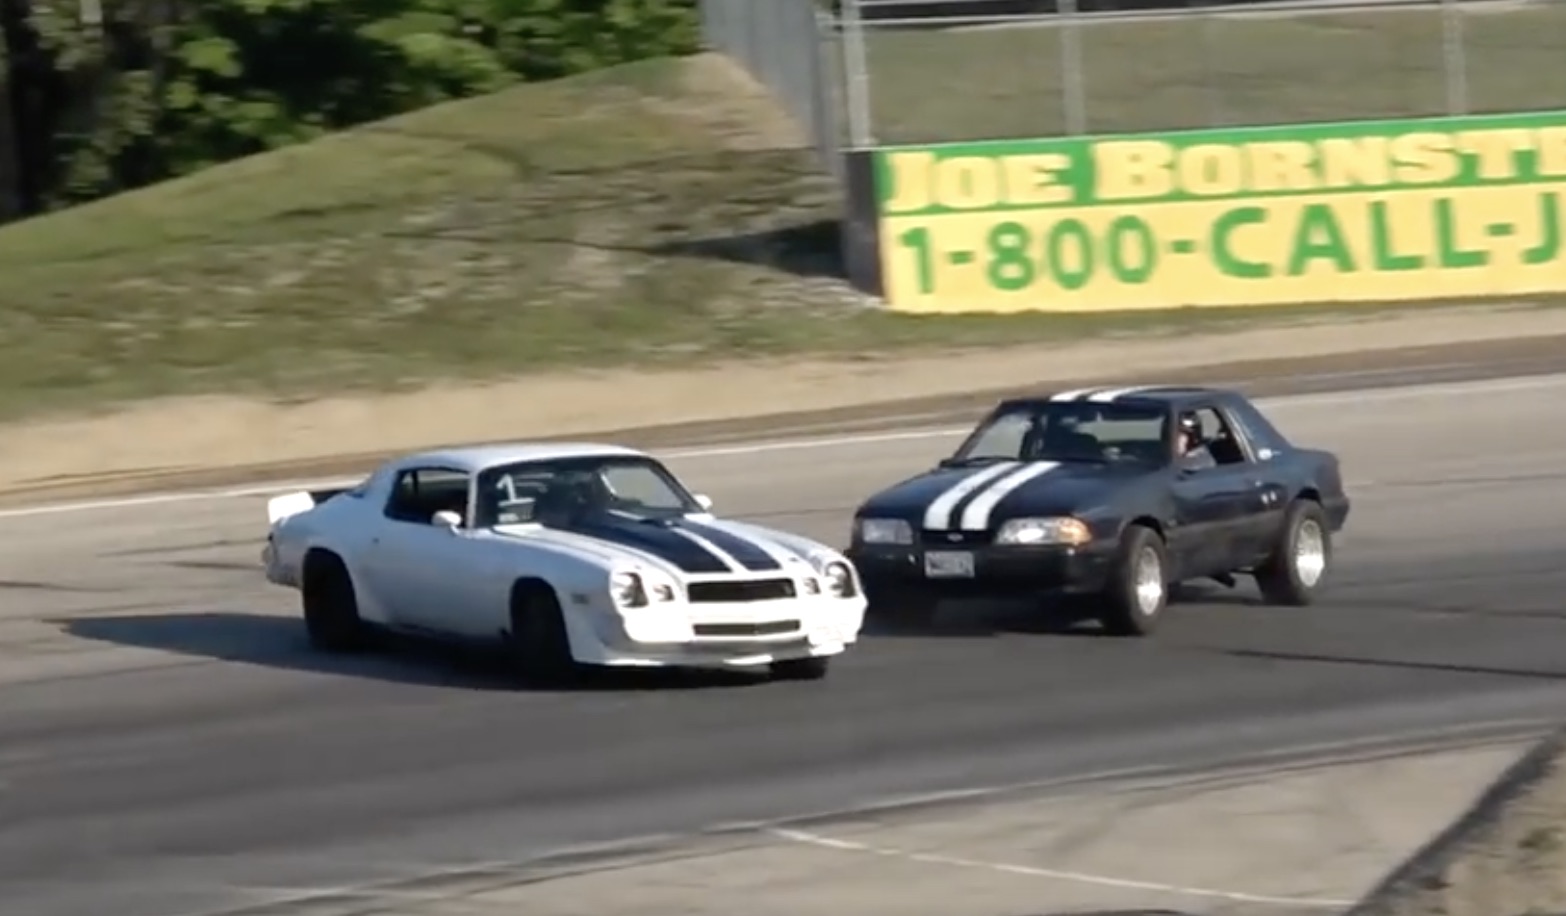 A Year In Review Of Spectator Drags: Close Races, Fender Rubbing And Wild Rides